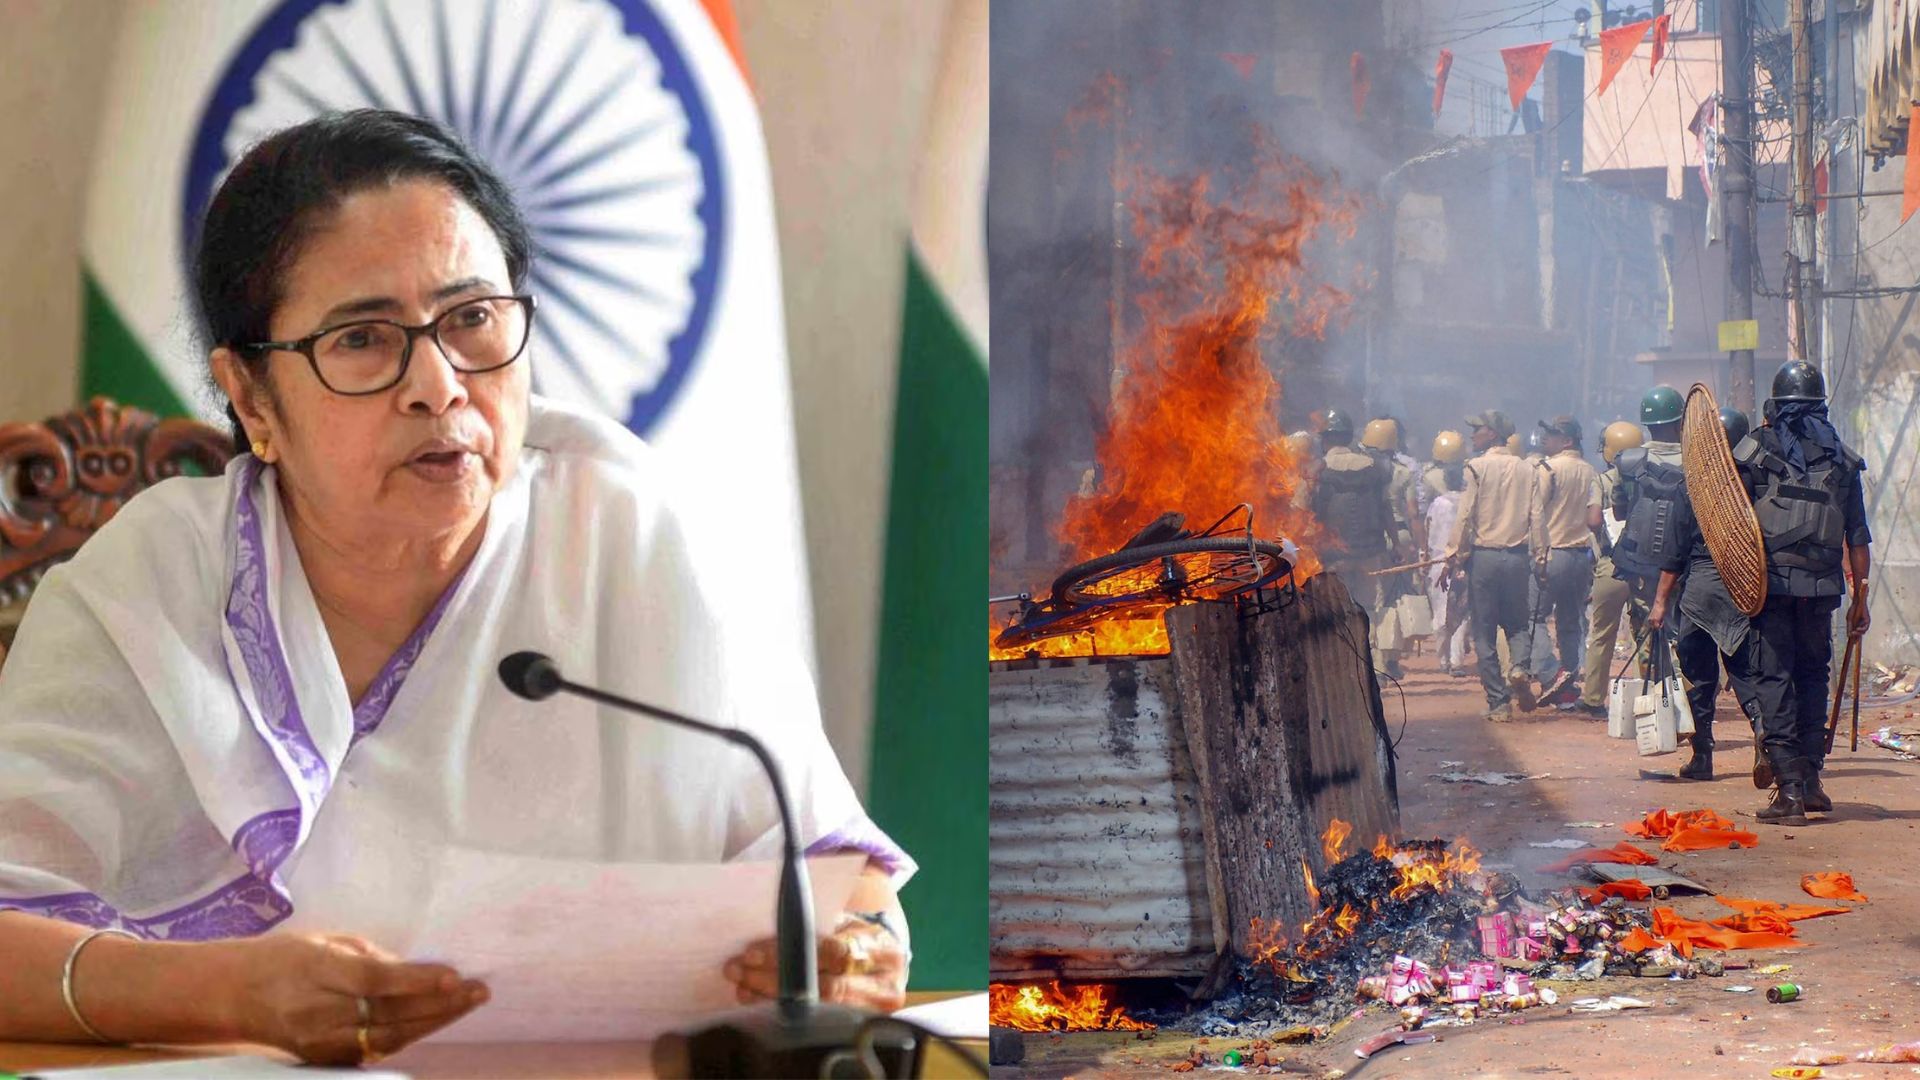 “West Bengal is a state run by the Rapists…”: BJP Slams TMC Amid Riots